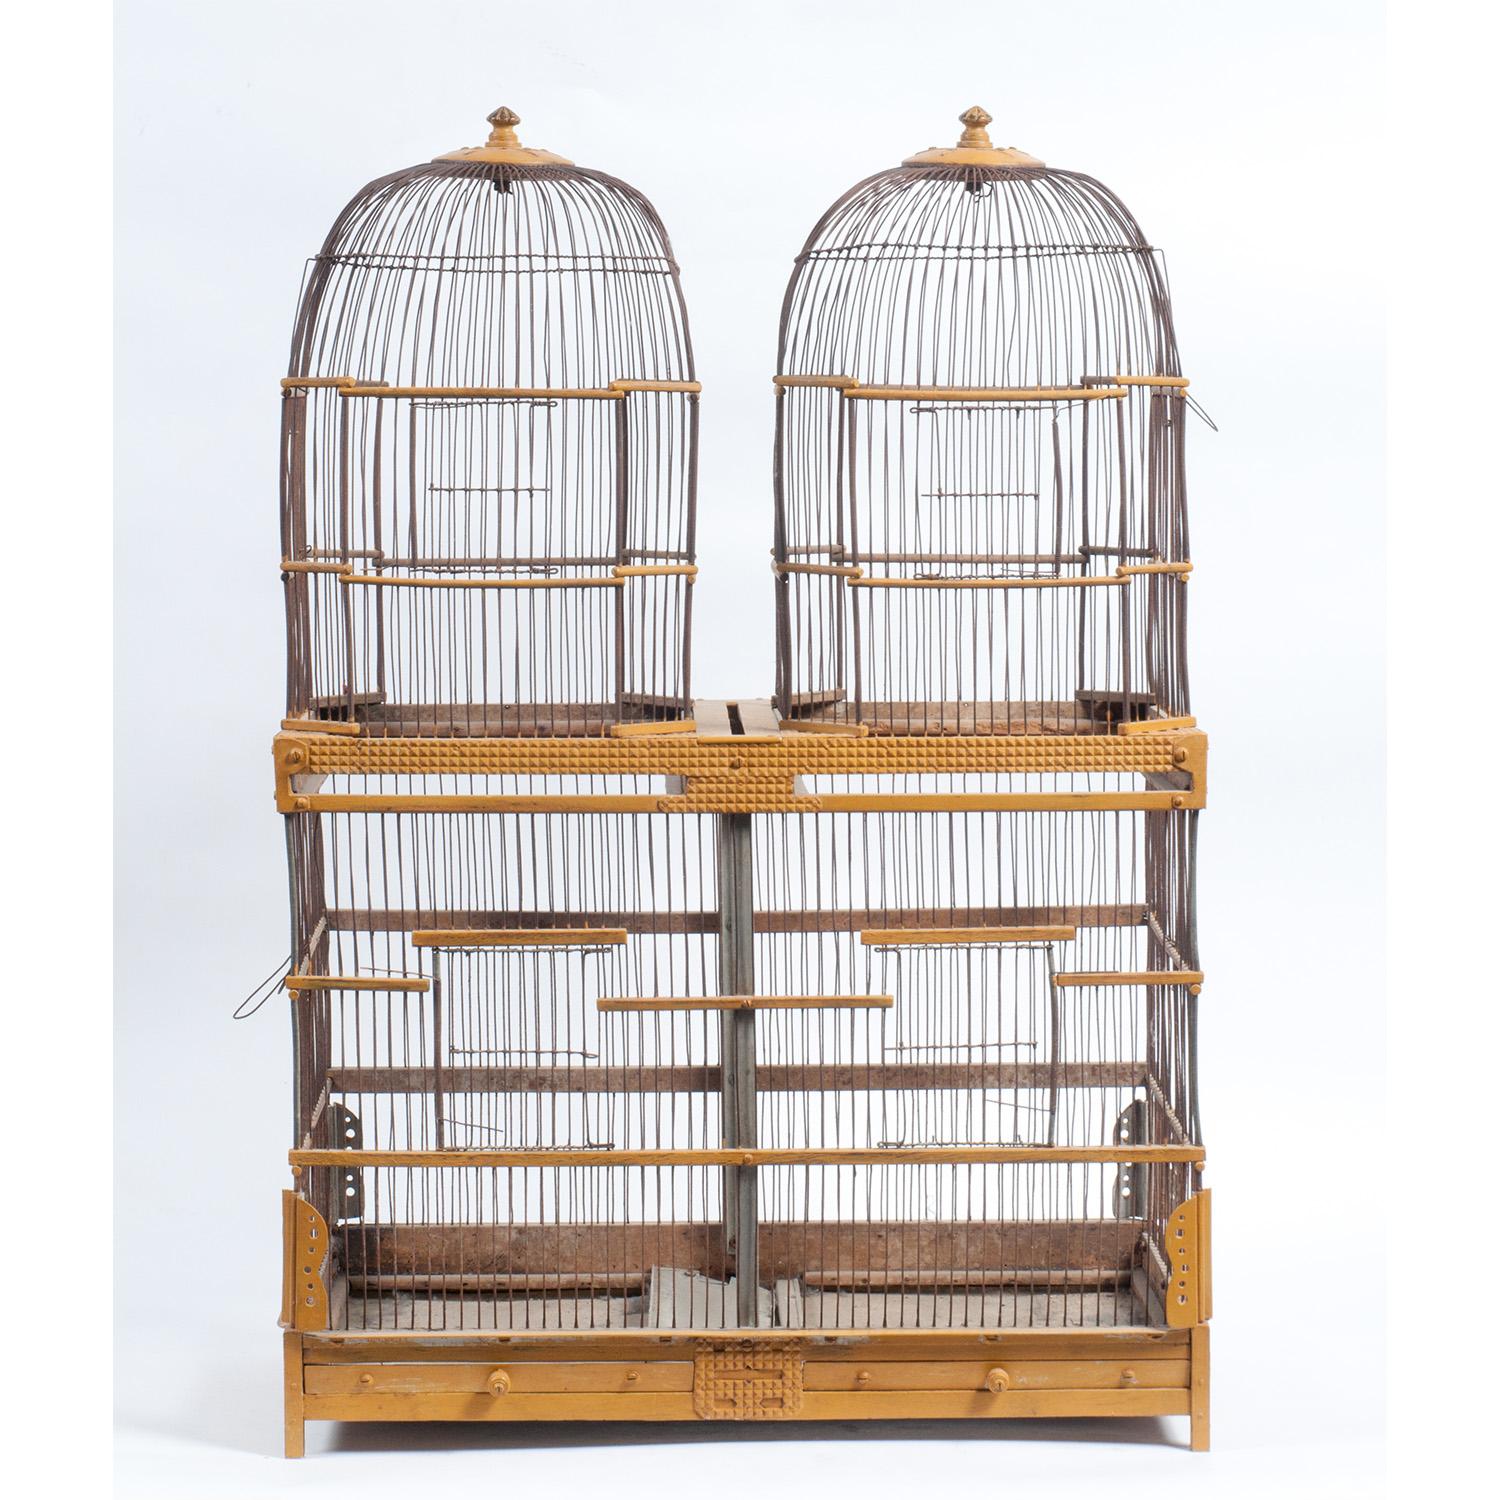 Vintage 19th Century yellow metal and wood double birdcage with matched domes, two drawers, and star detailing.
